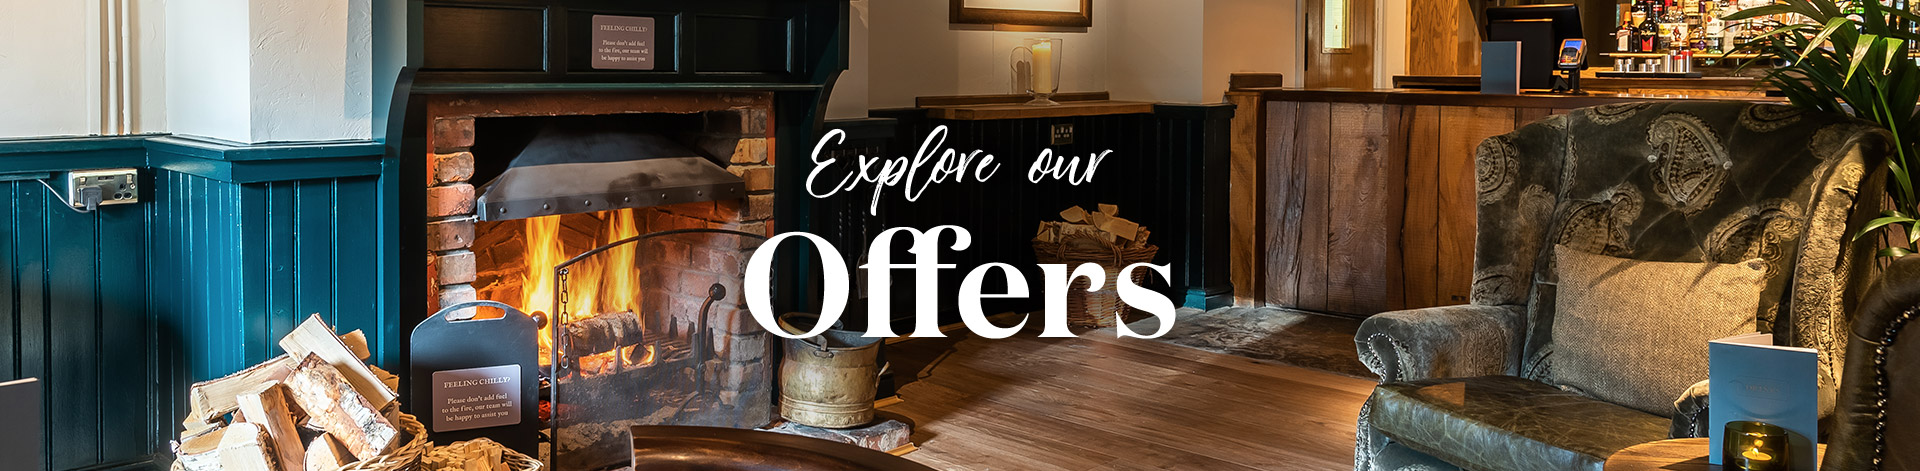 Our latest offers at The Beagle